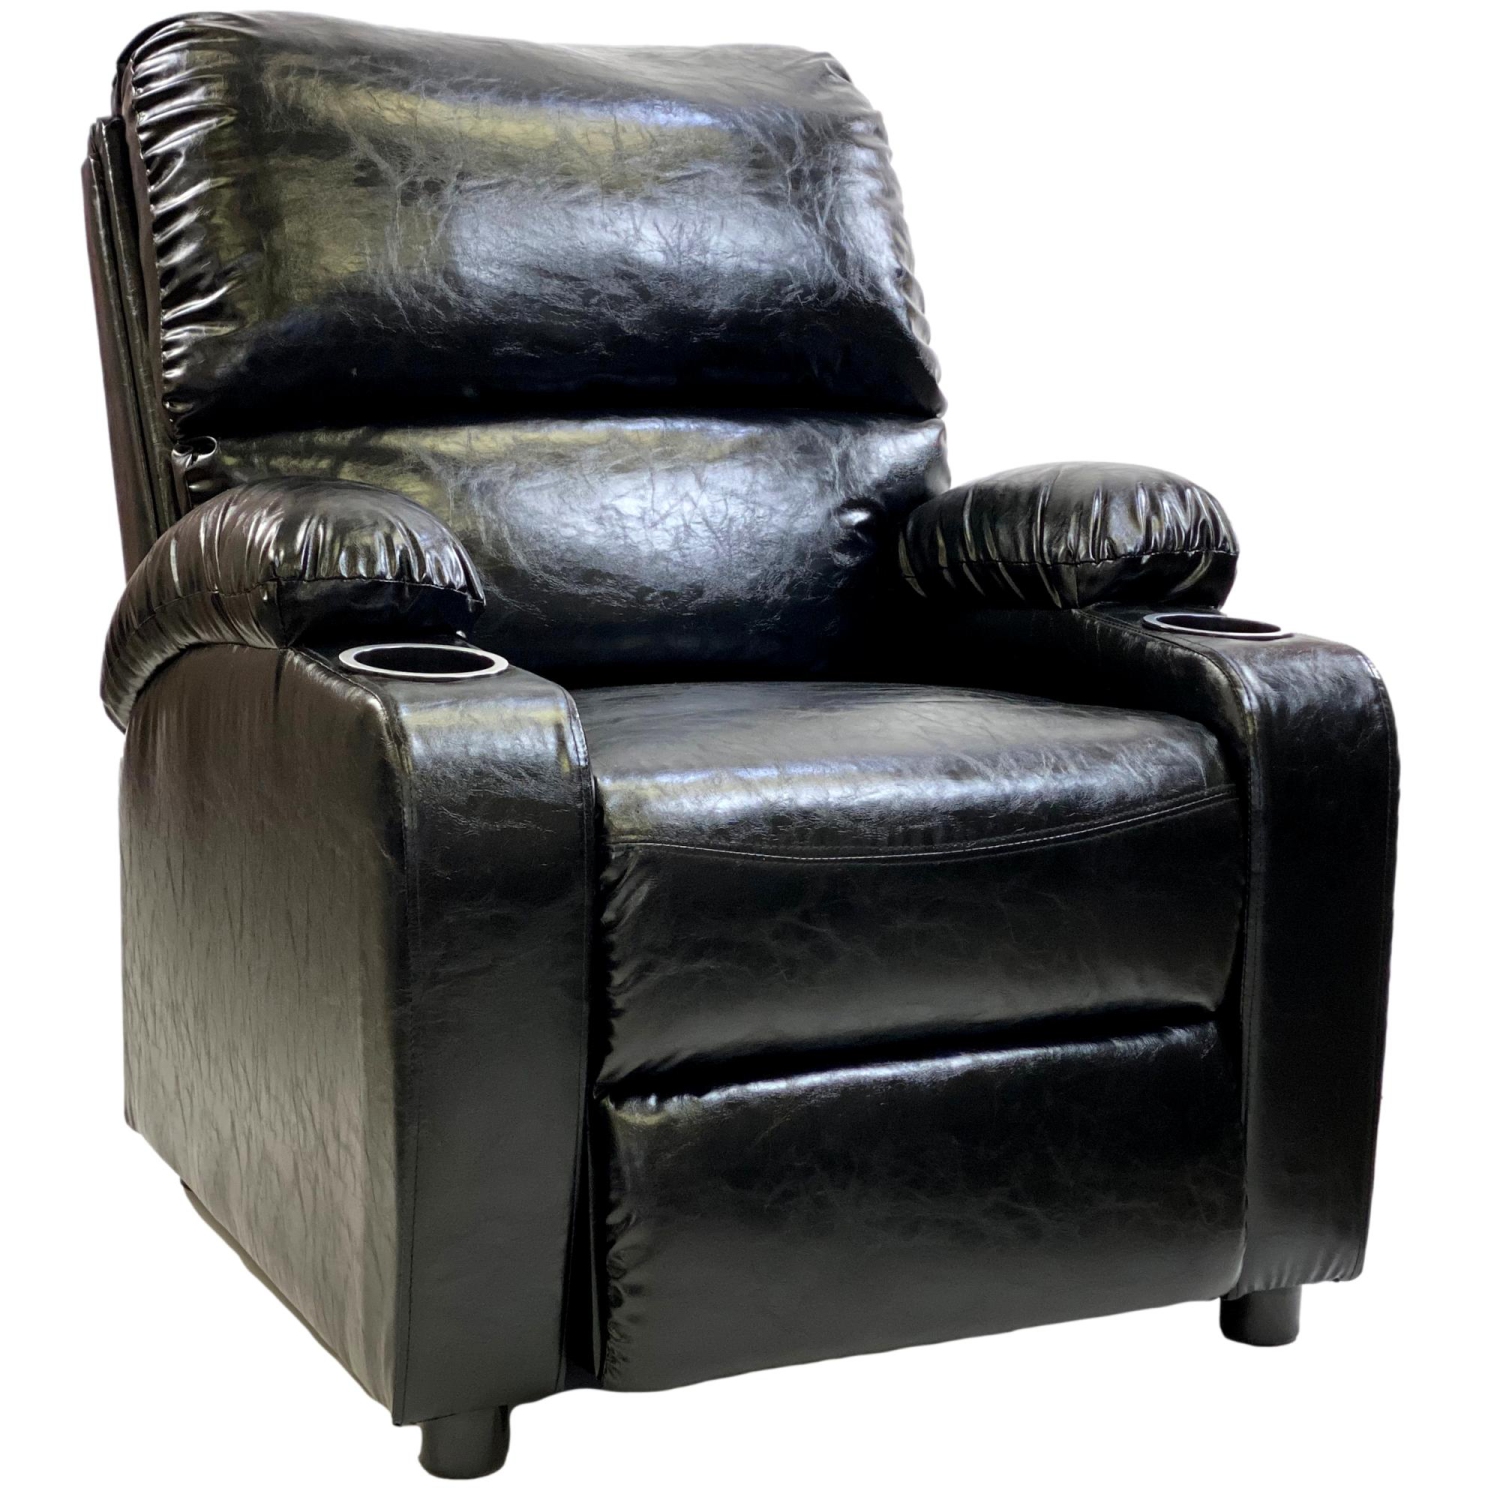 ViscoLogic RomaLuxe Manual Accent Recliner Chair (Black)